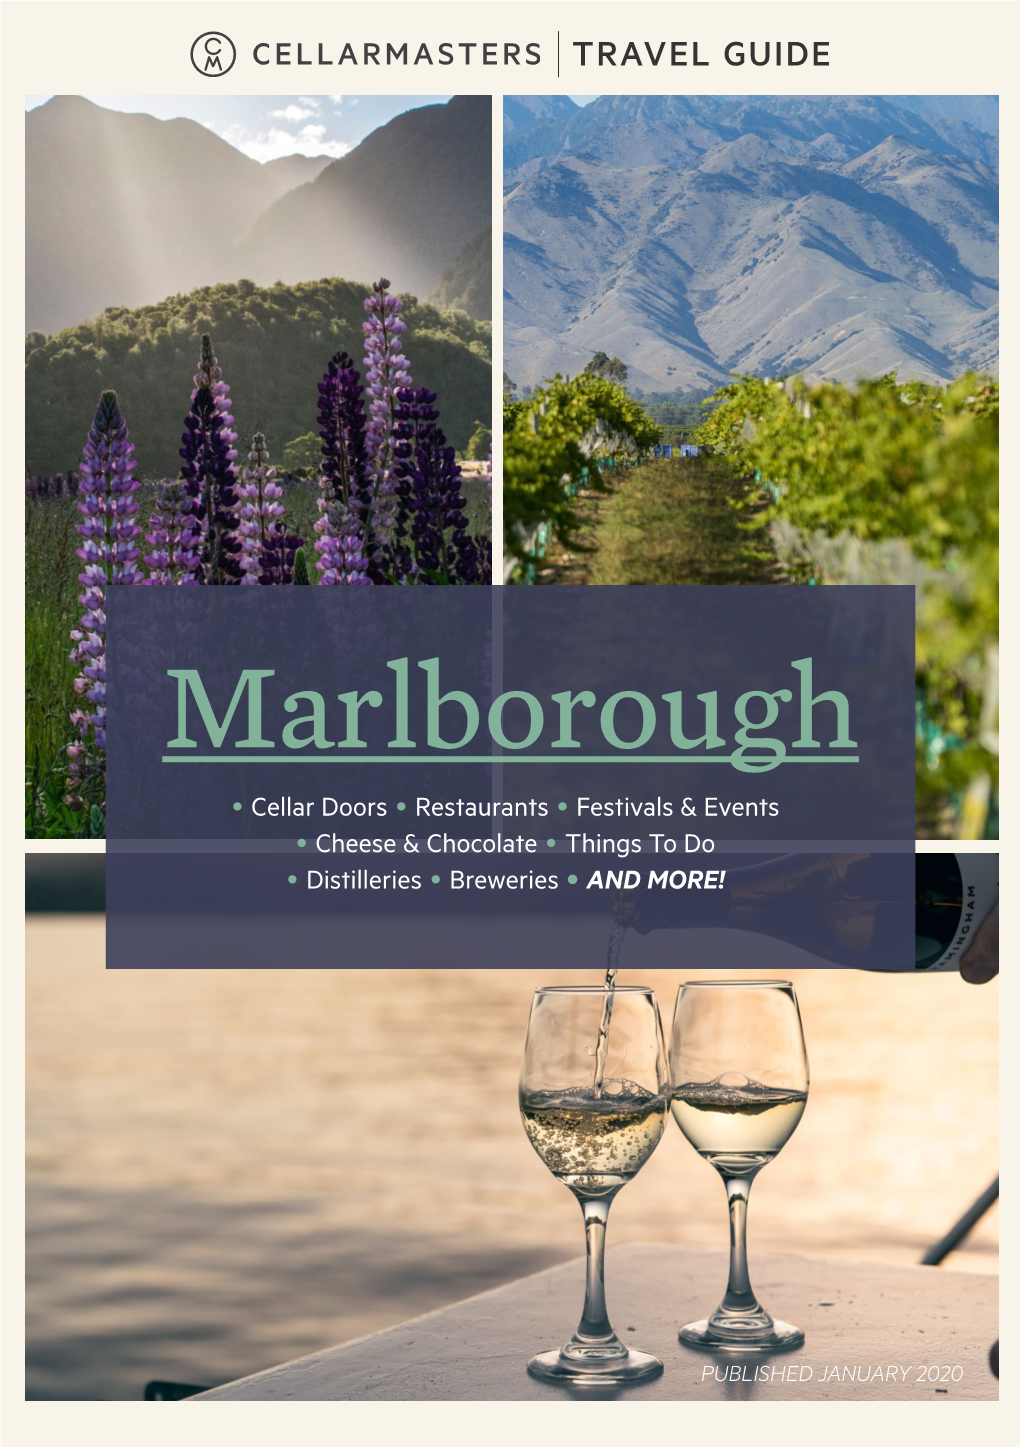 Marlborough • Cellar Doors • Restaurants • Festivals & Events • Cheese & Chocolate • Things to Do • Distilleries • Breweries • and MORE!